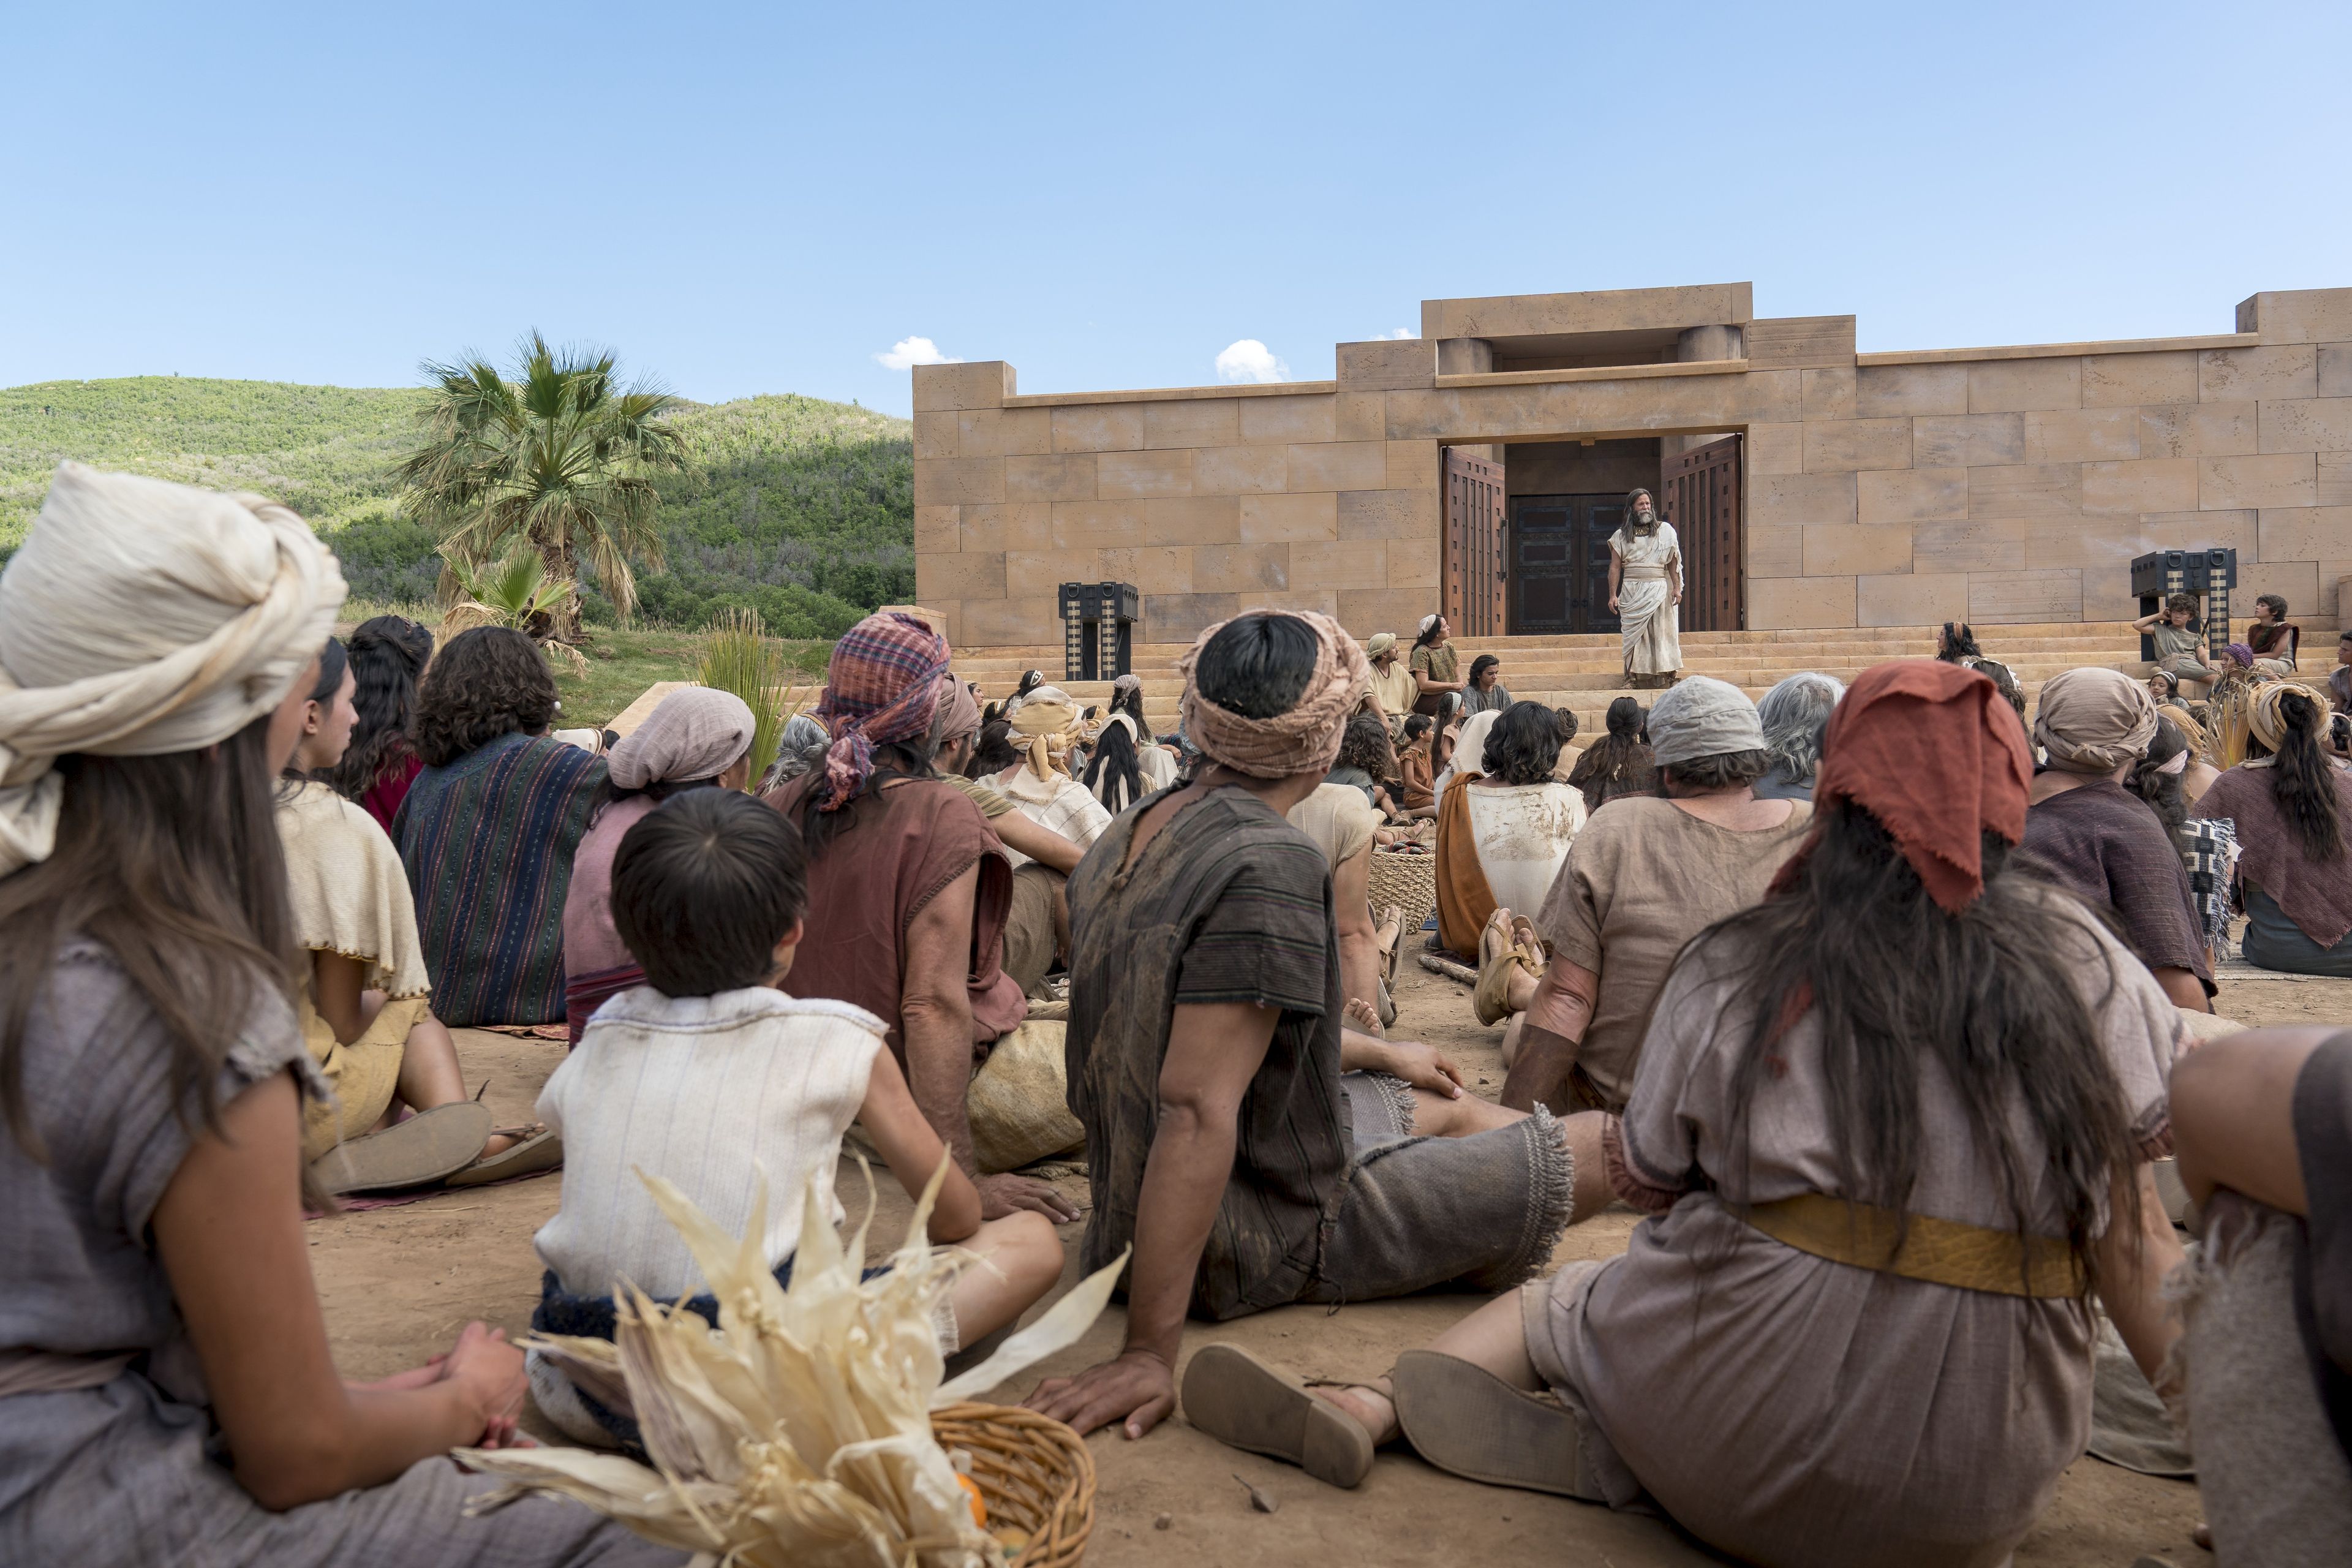 Nephites gathered around the temple listen as Jacob teaches about pride and chastity.